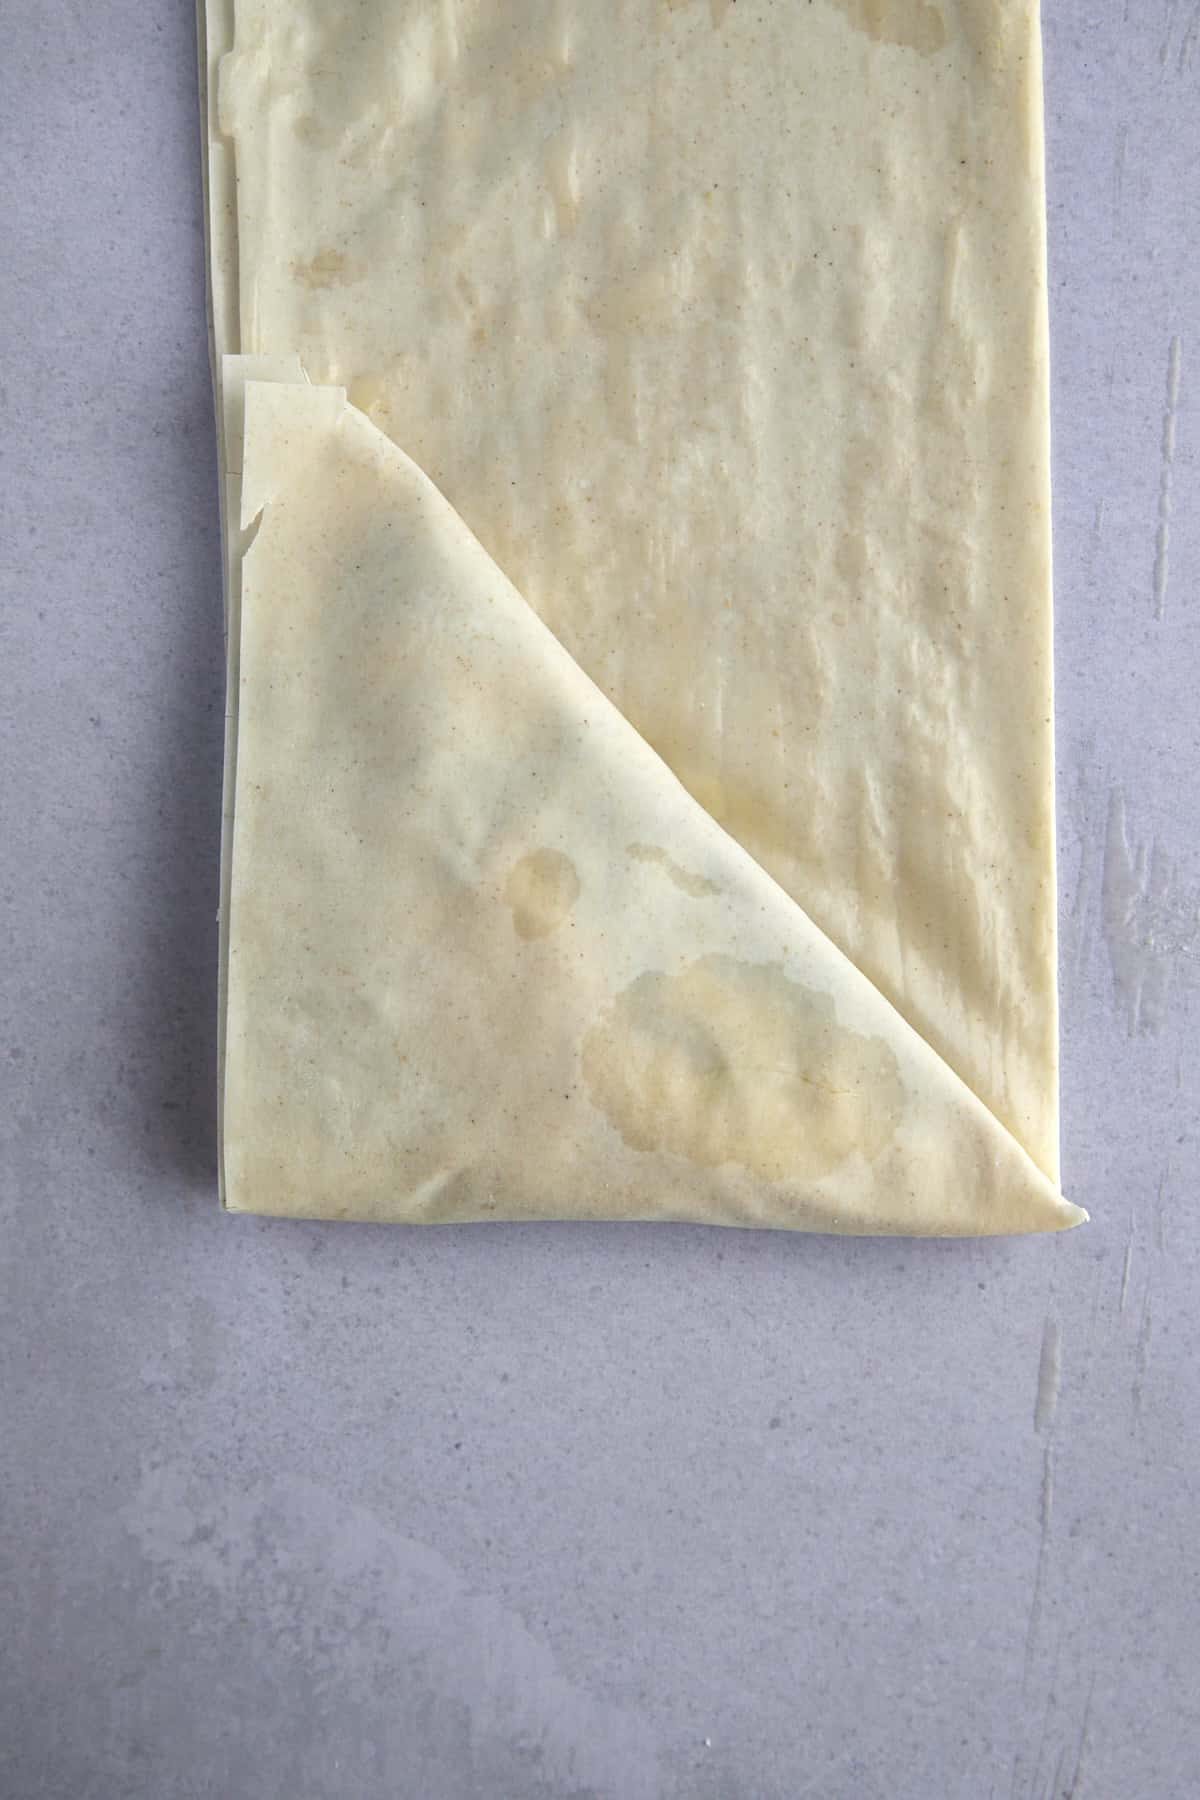 Raw layered phyllo dough sheets stuffed with spanakopita filling being folded into a triangle. 